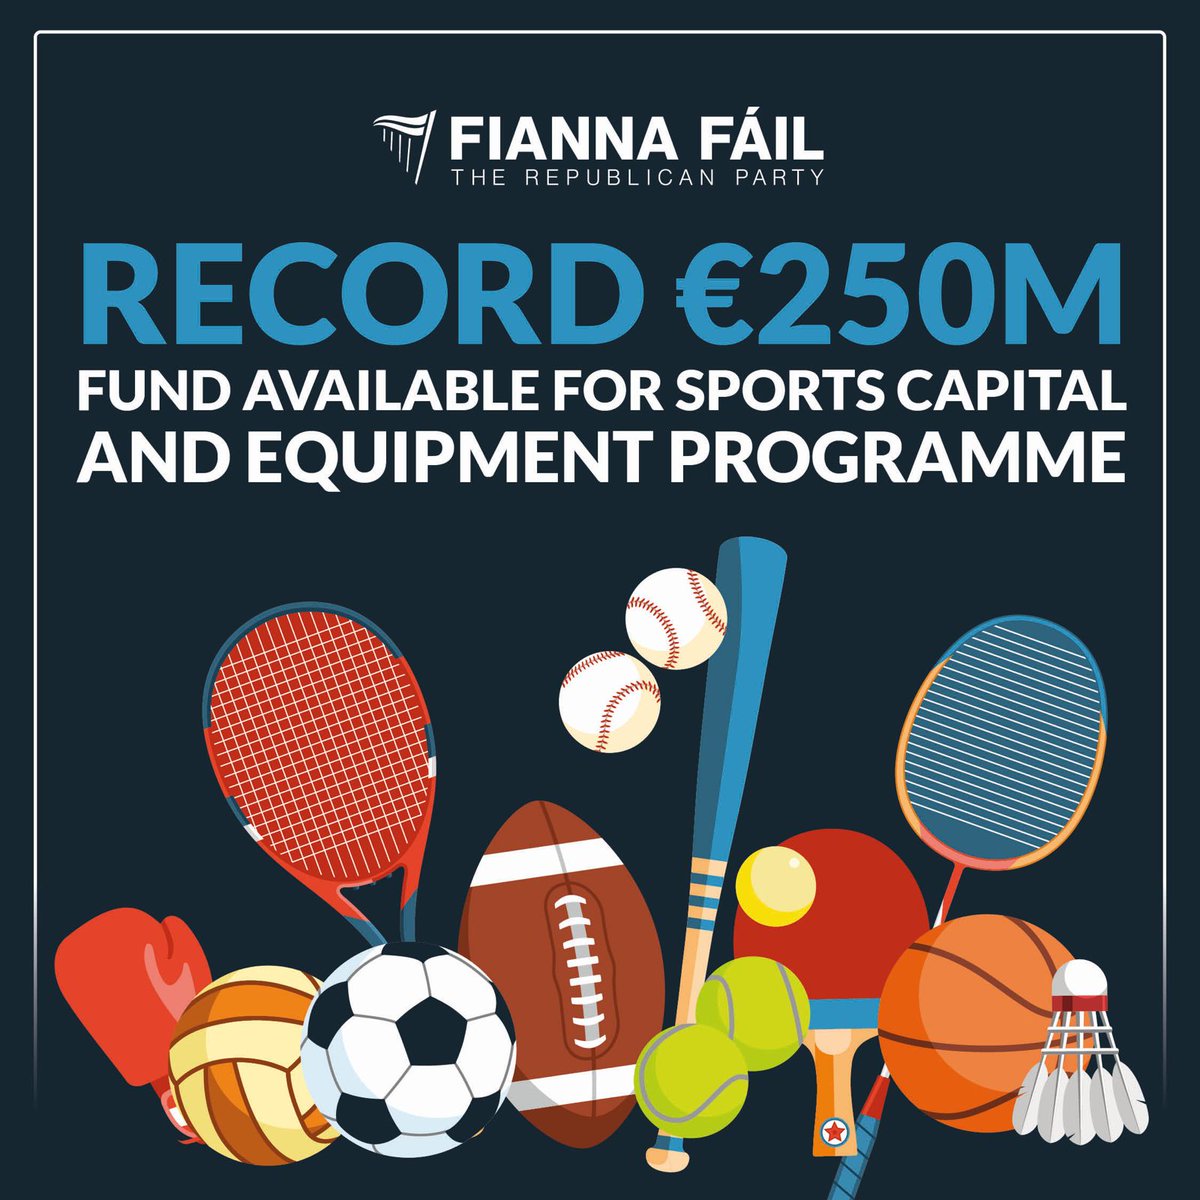 €250m in funding announced for the largest-ever investment, under Fianna Fáil, in sports facilities nationwide. Minister for Sport @ThomasByrneTD will confirm individual allocations later in the autumn.